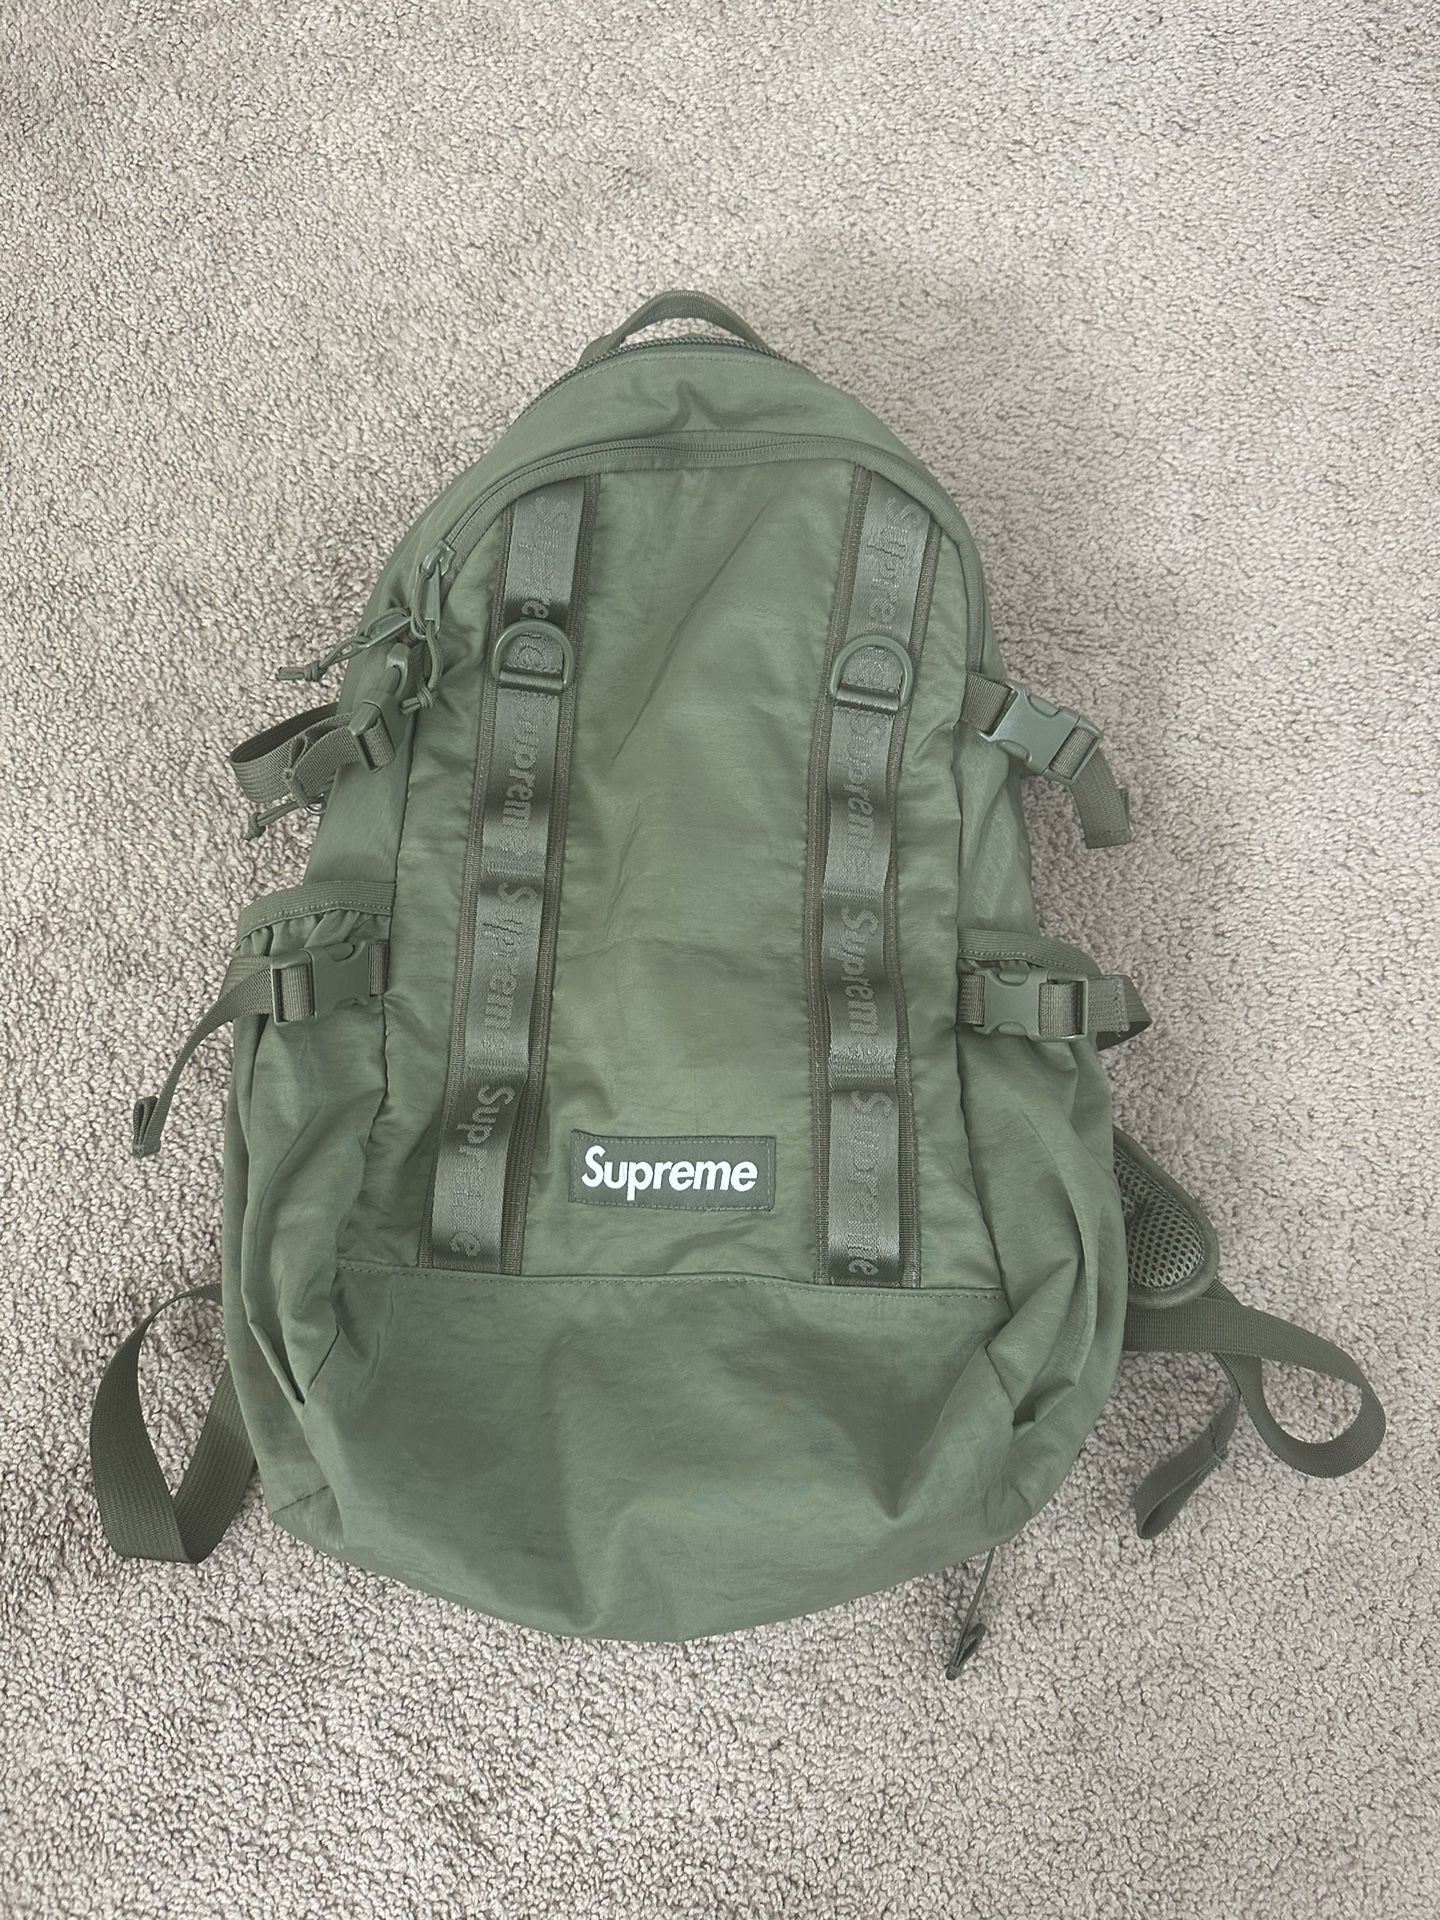 New Supreme Backpack Fw20